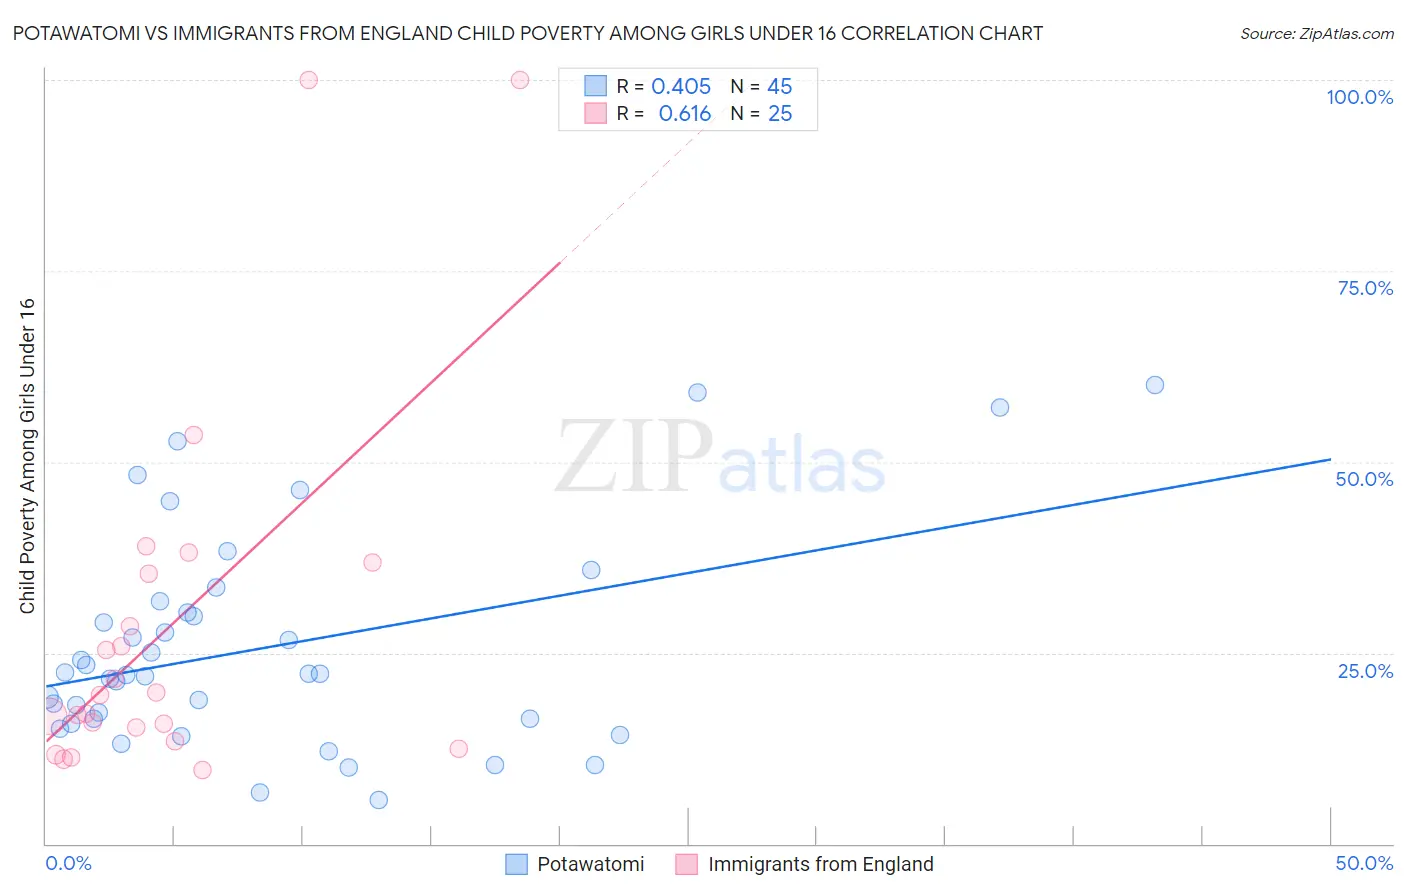 Potawatomi vs Immigrants from England Child Poverty Among Girls Under 16